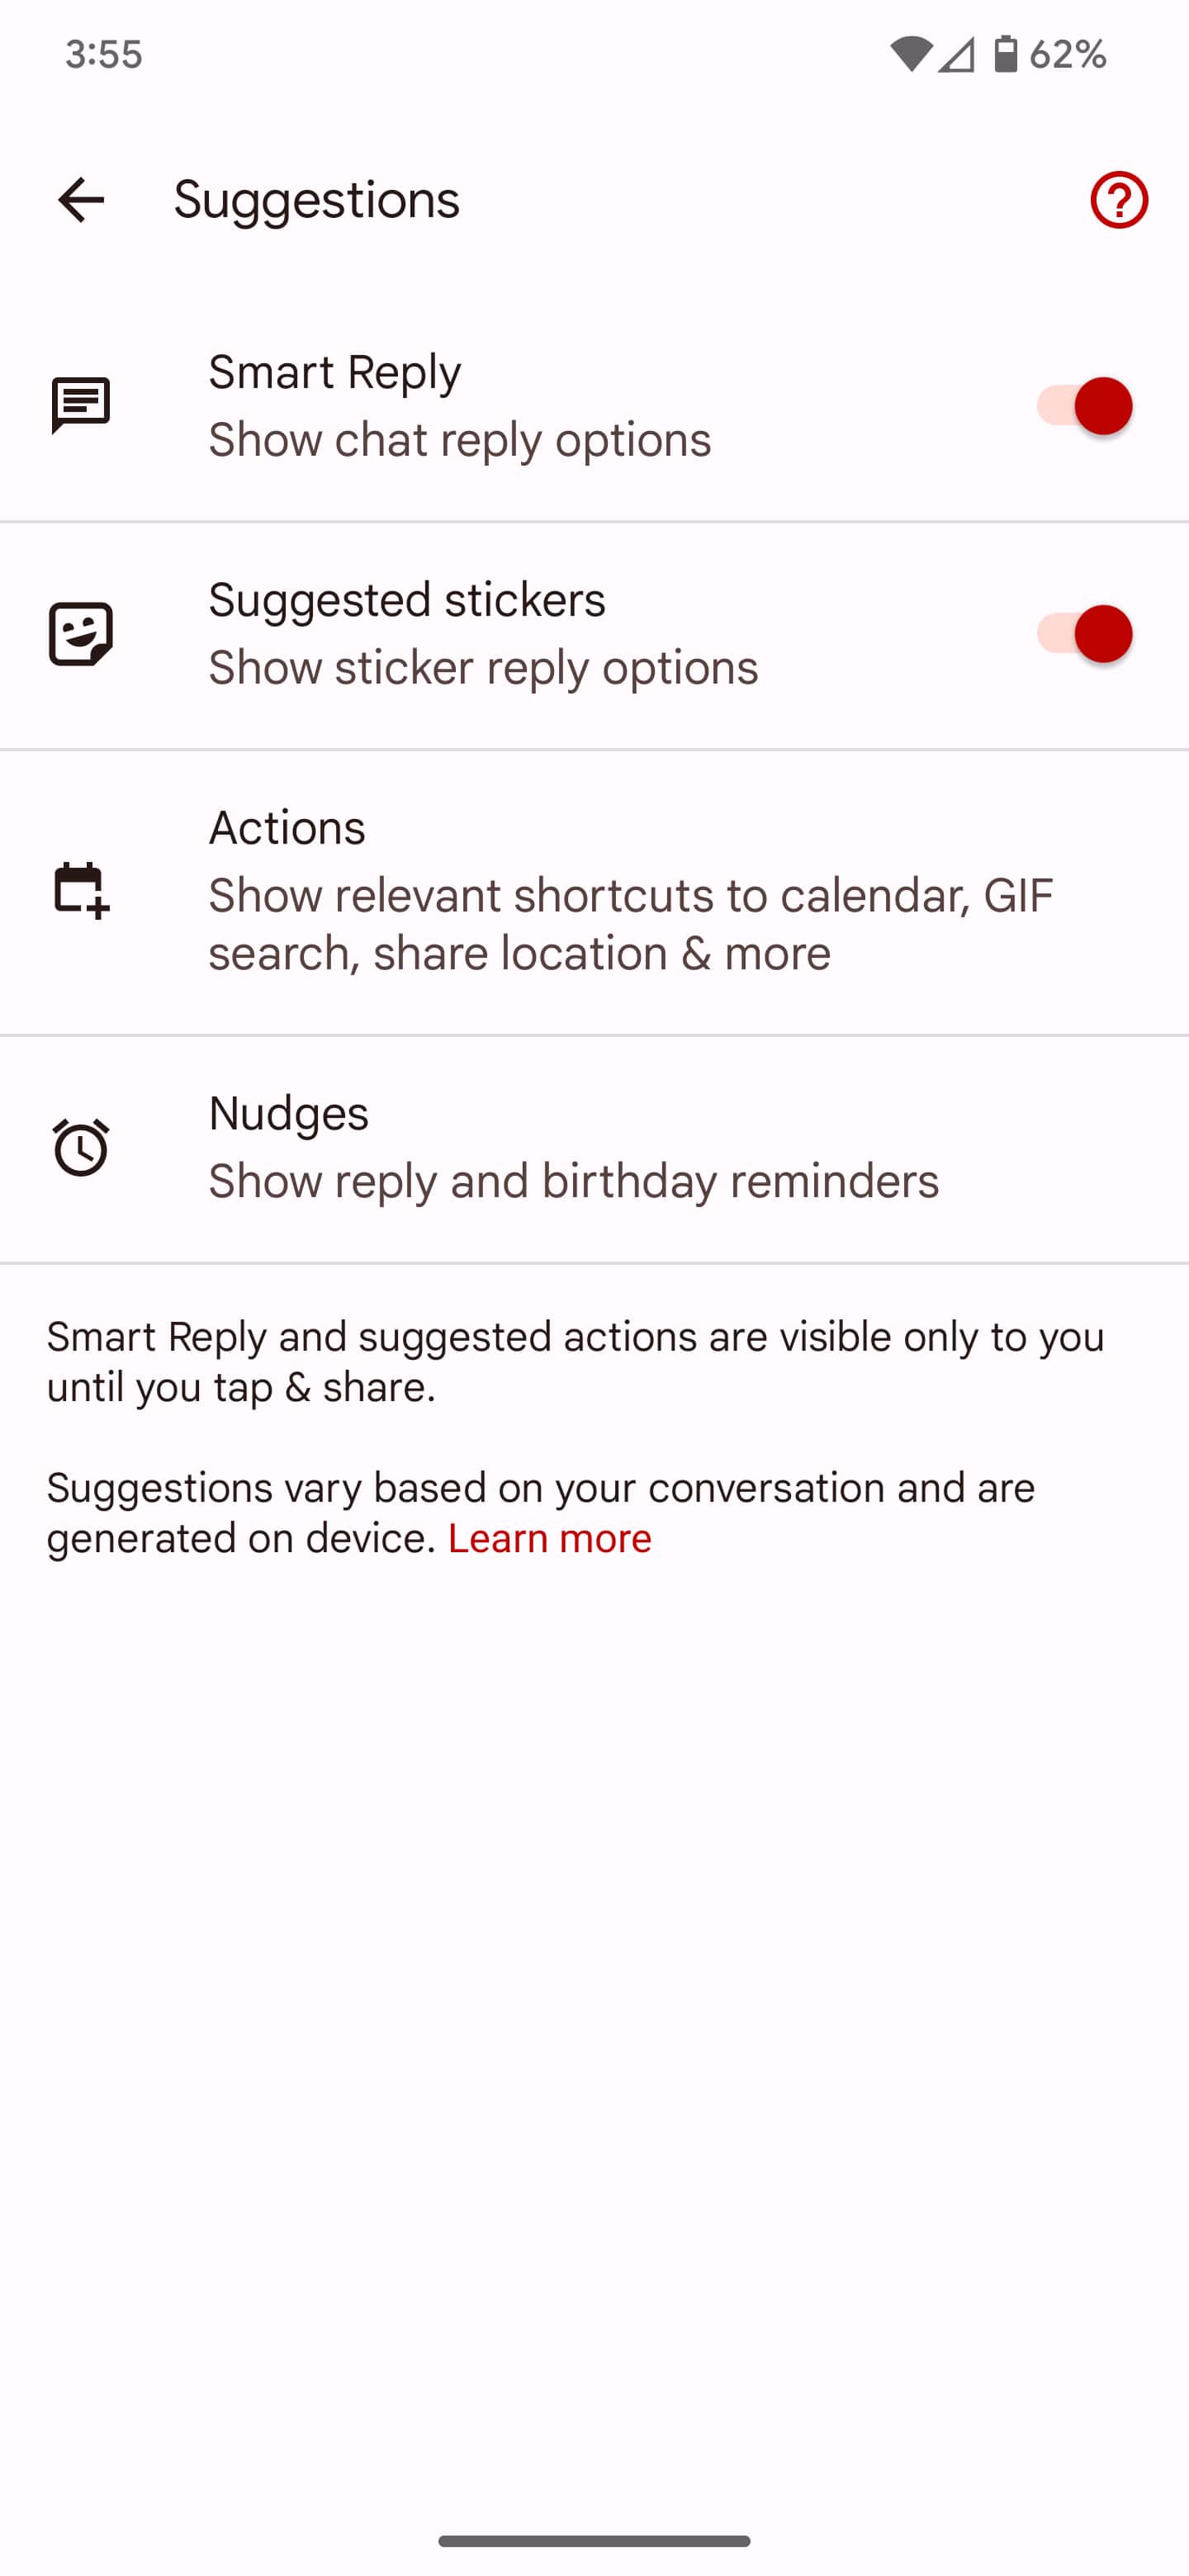 Google Messages removed Assistant but might replace it with ‘Spotlights’